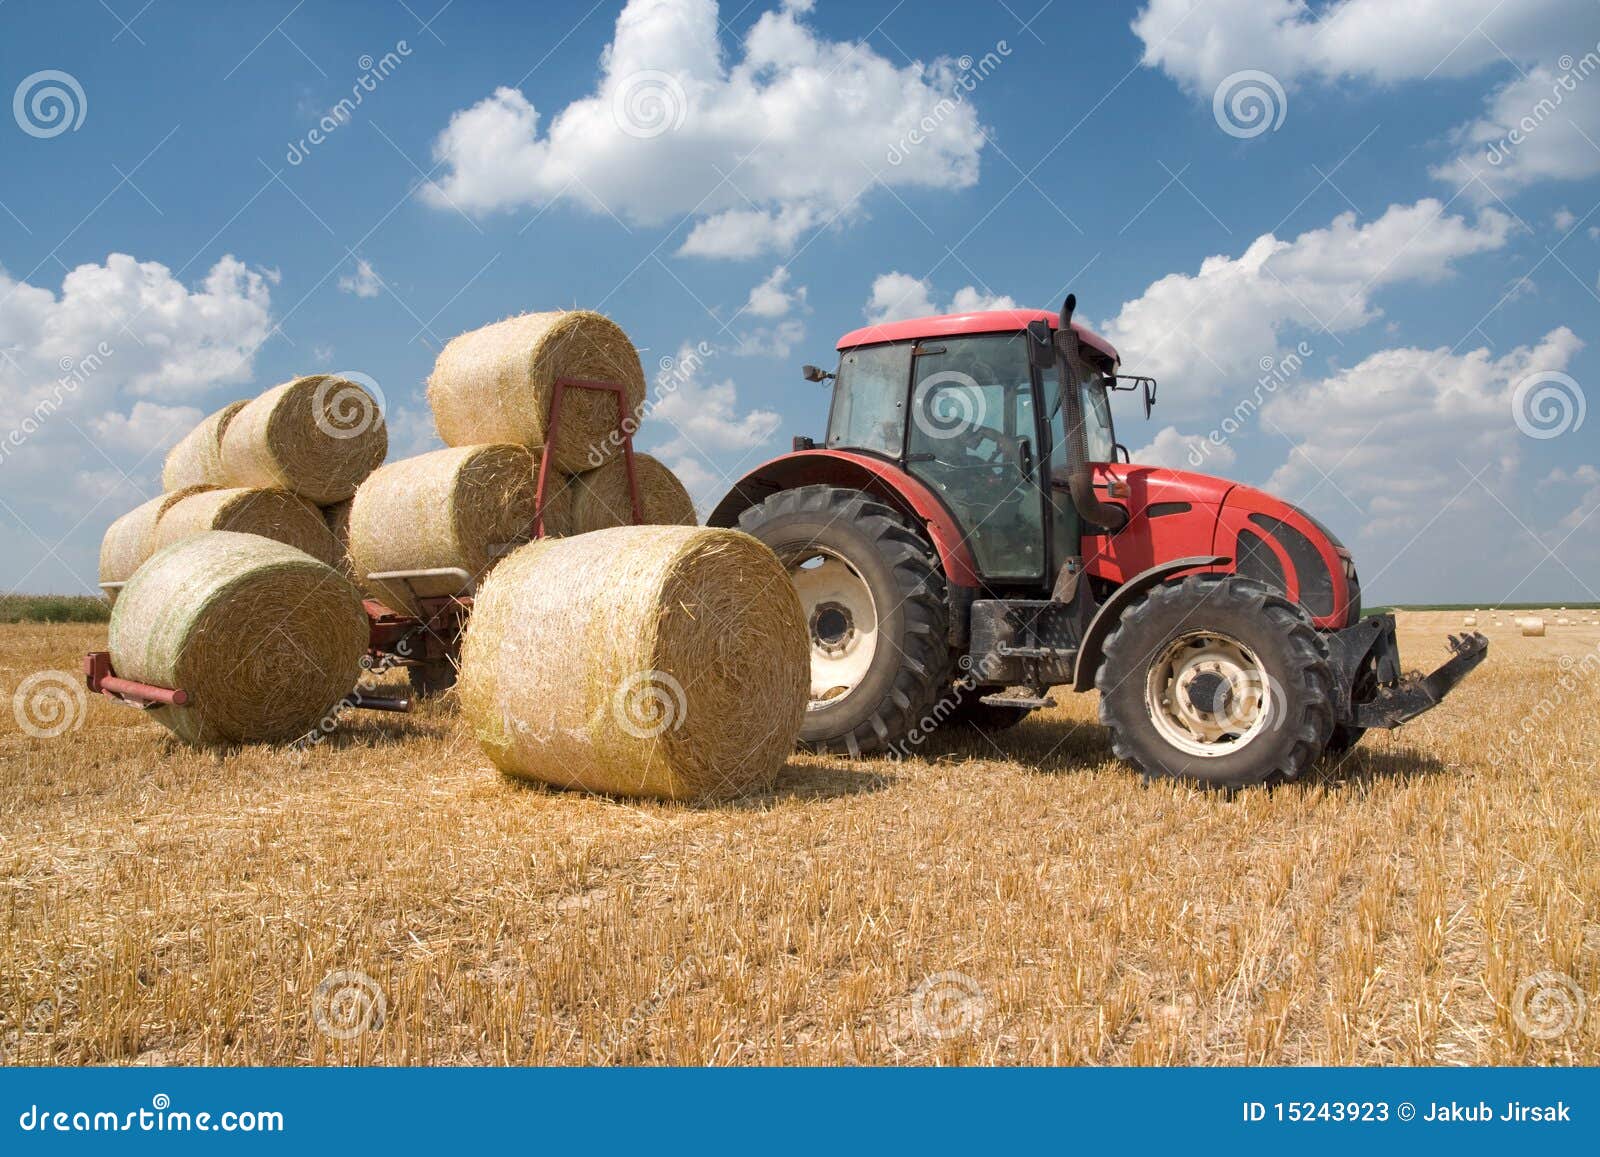 agriculture - tractor